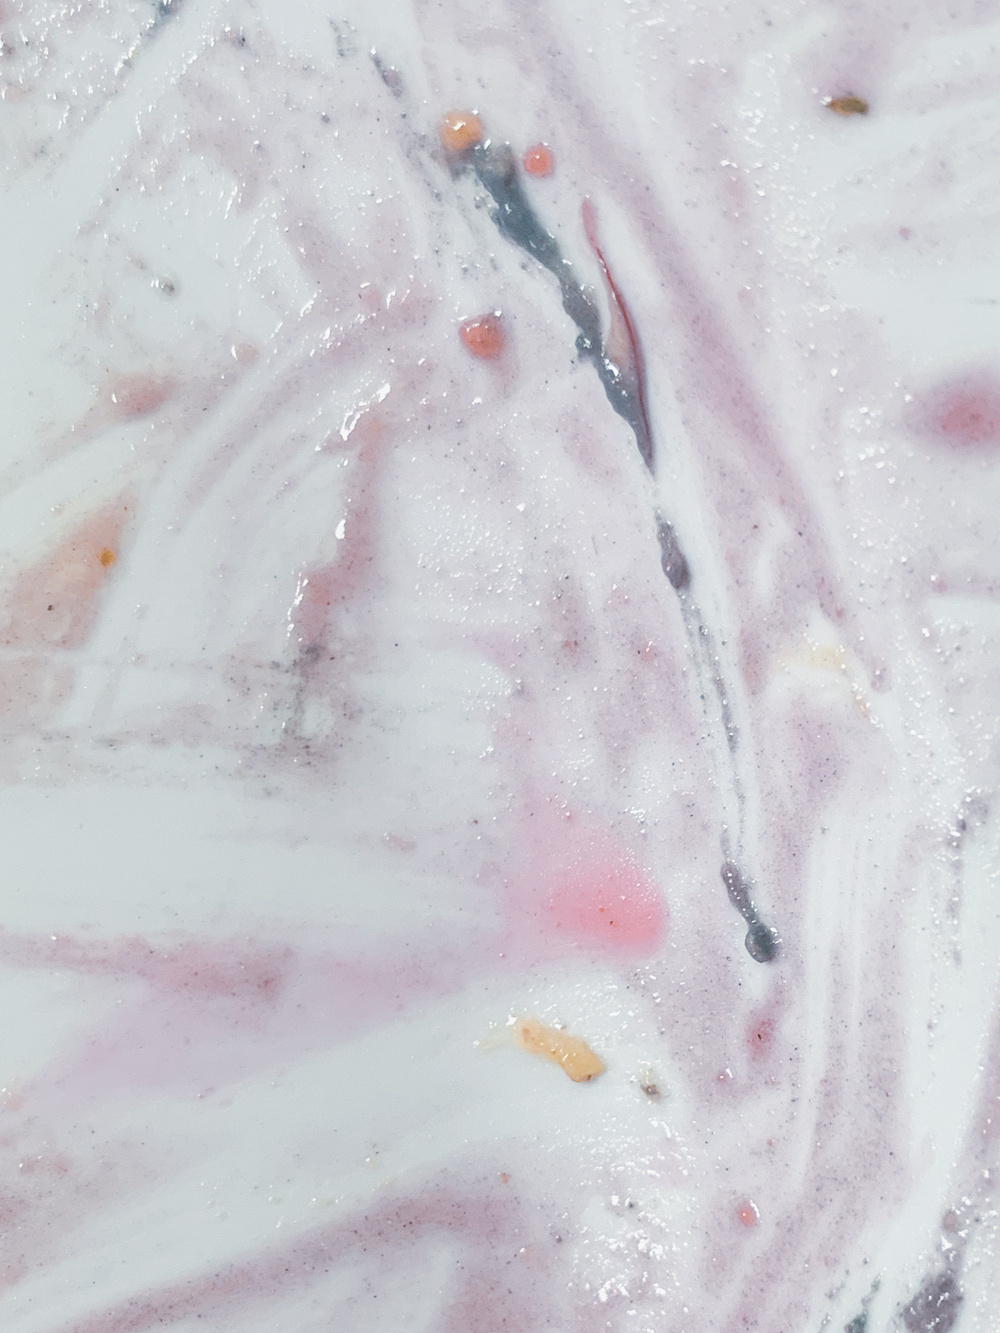 photo of slimy-looking and somewhat artless smears on a whitish surface in rather pretty shades of pale to bright pink, purplish to mauve, deep greenish greyish blue, and orange.